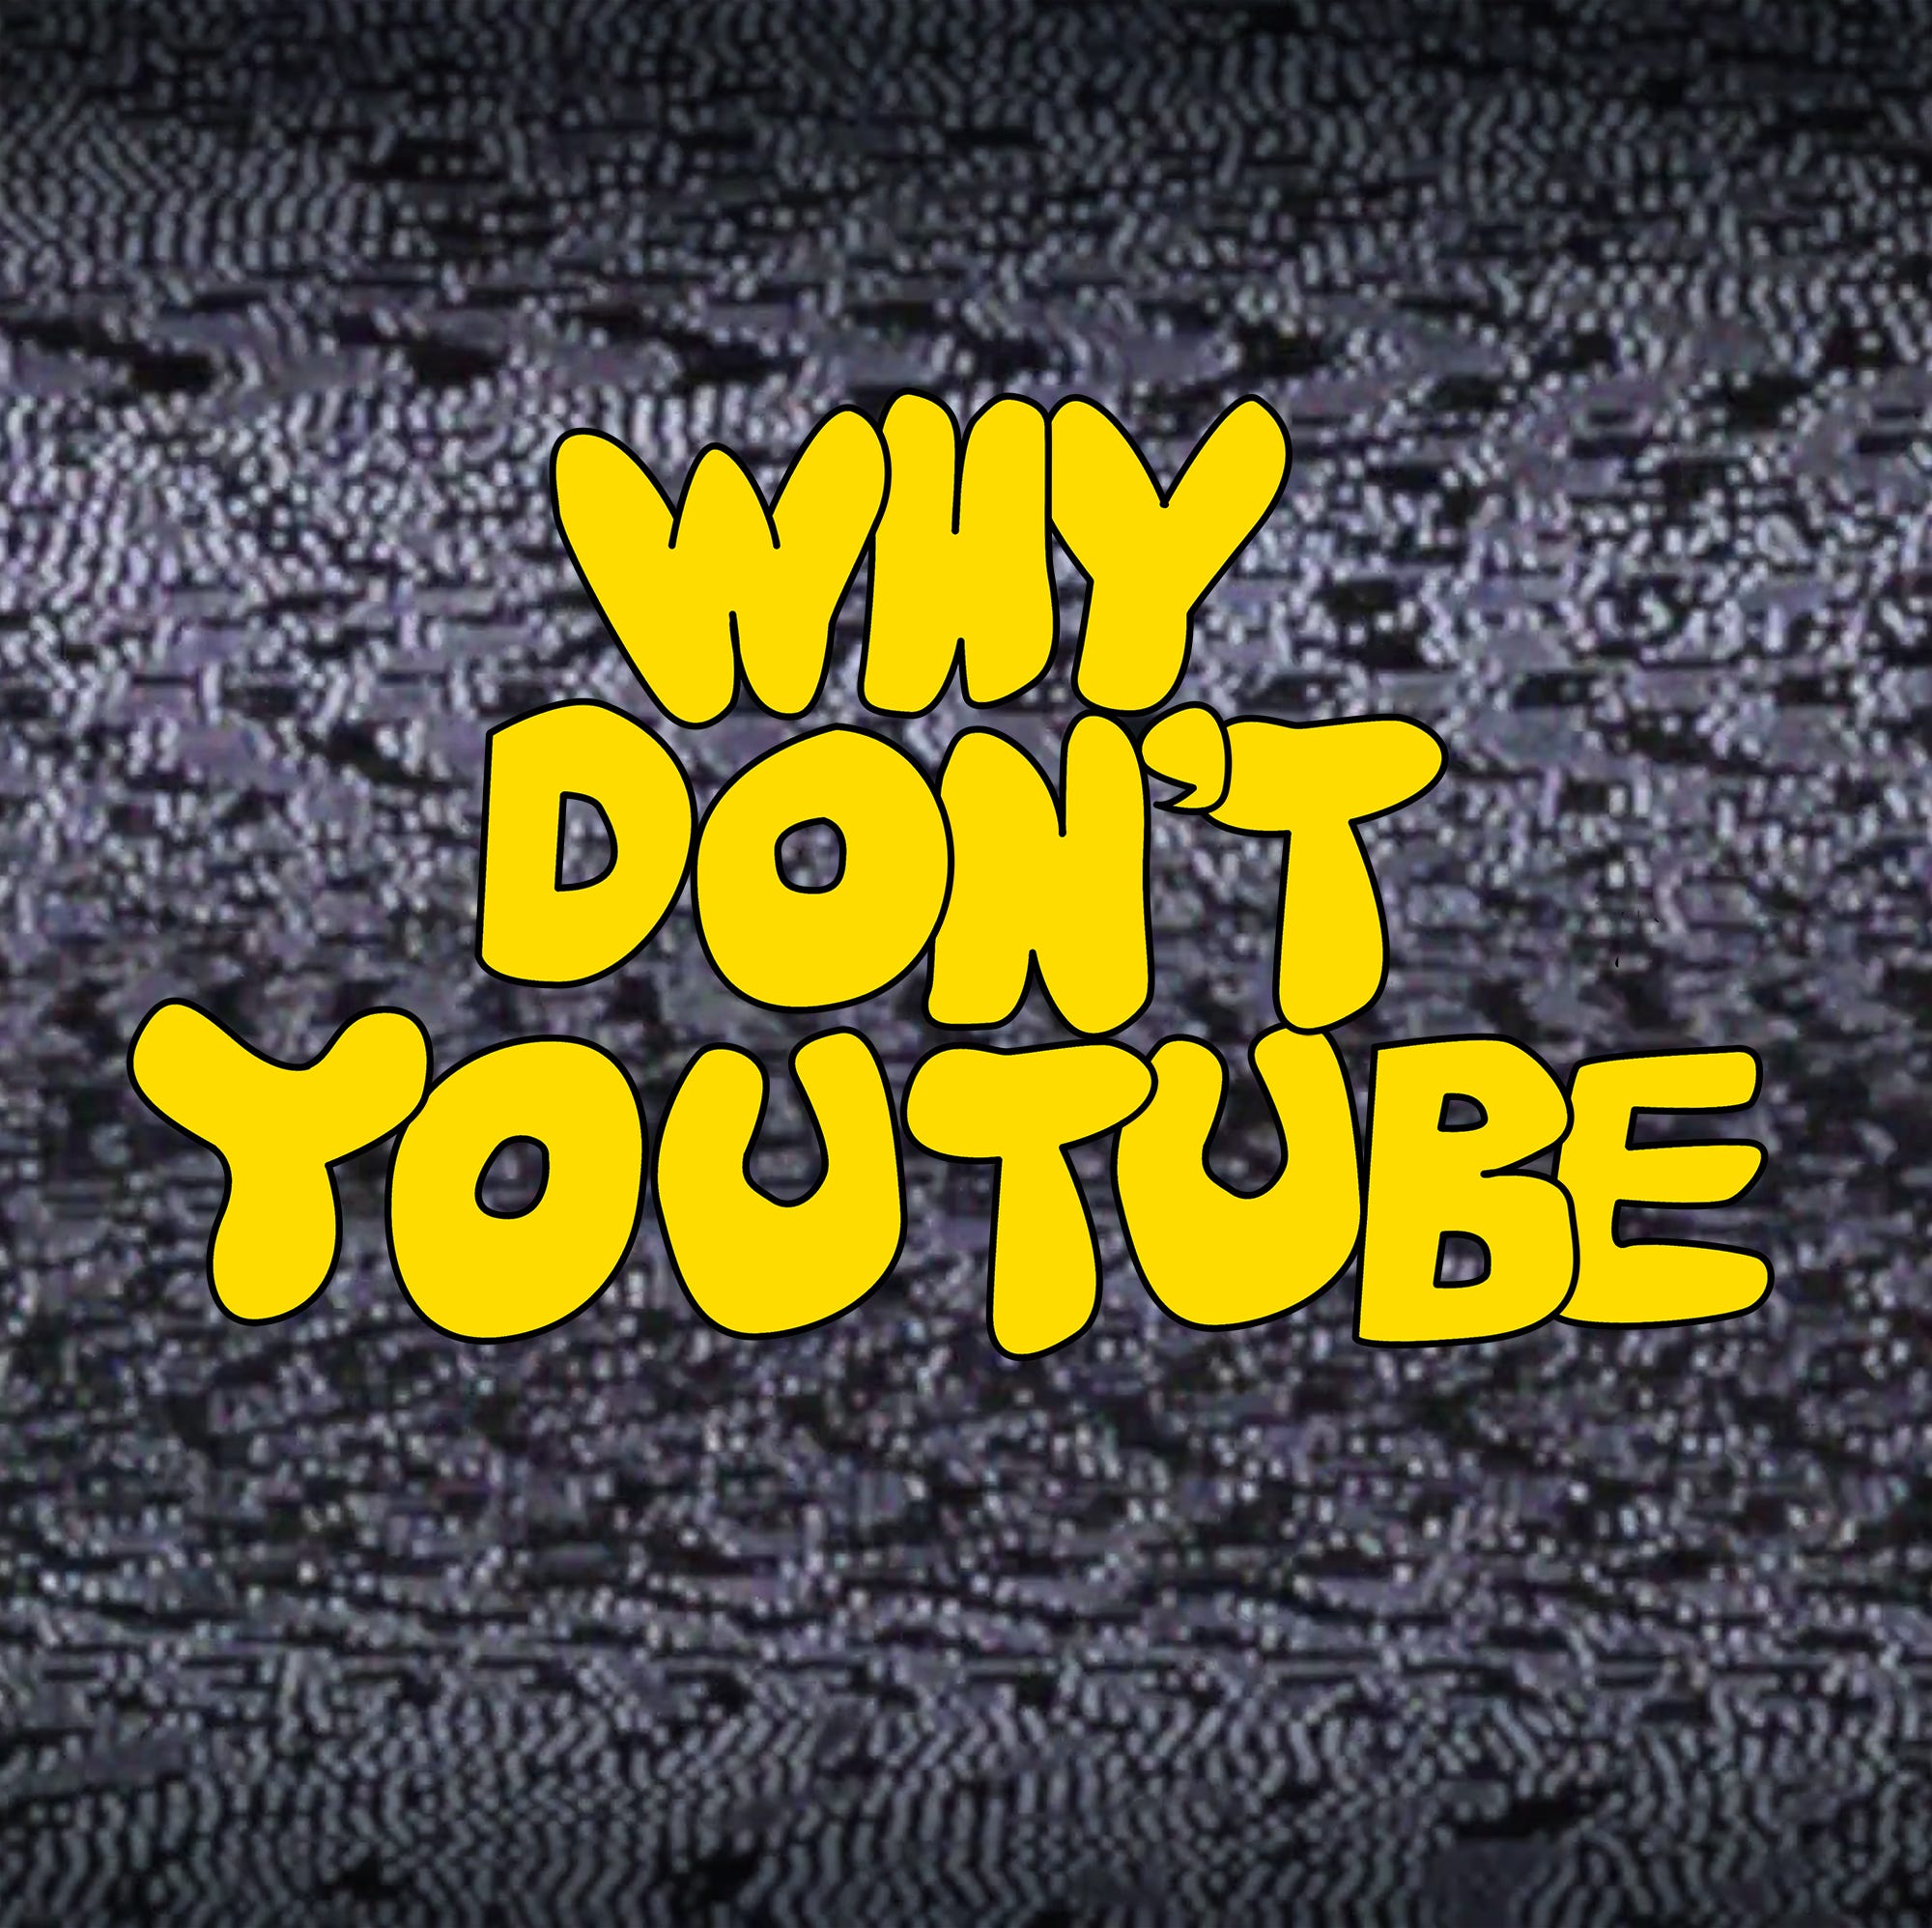 The Why Don't YouTube? Newsletter